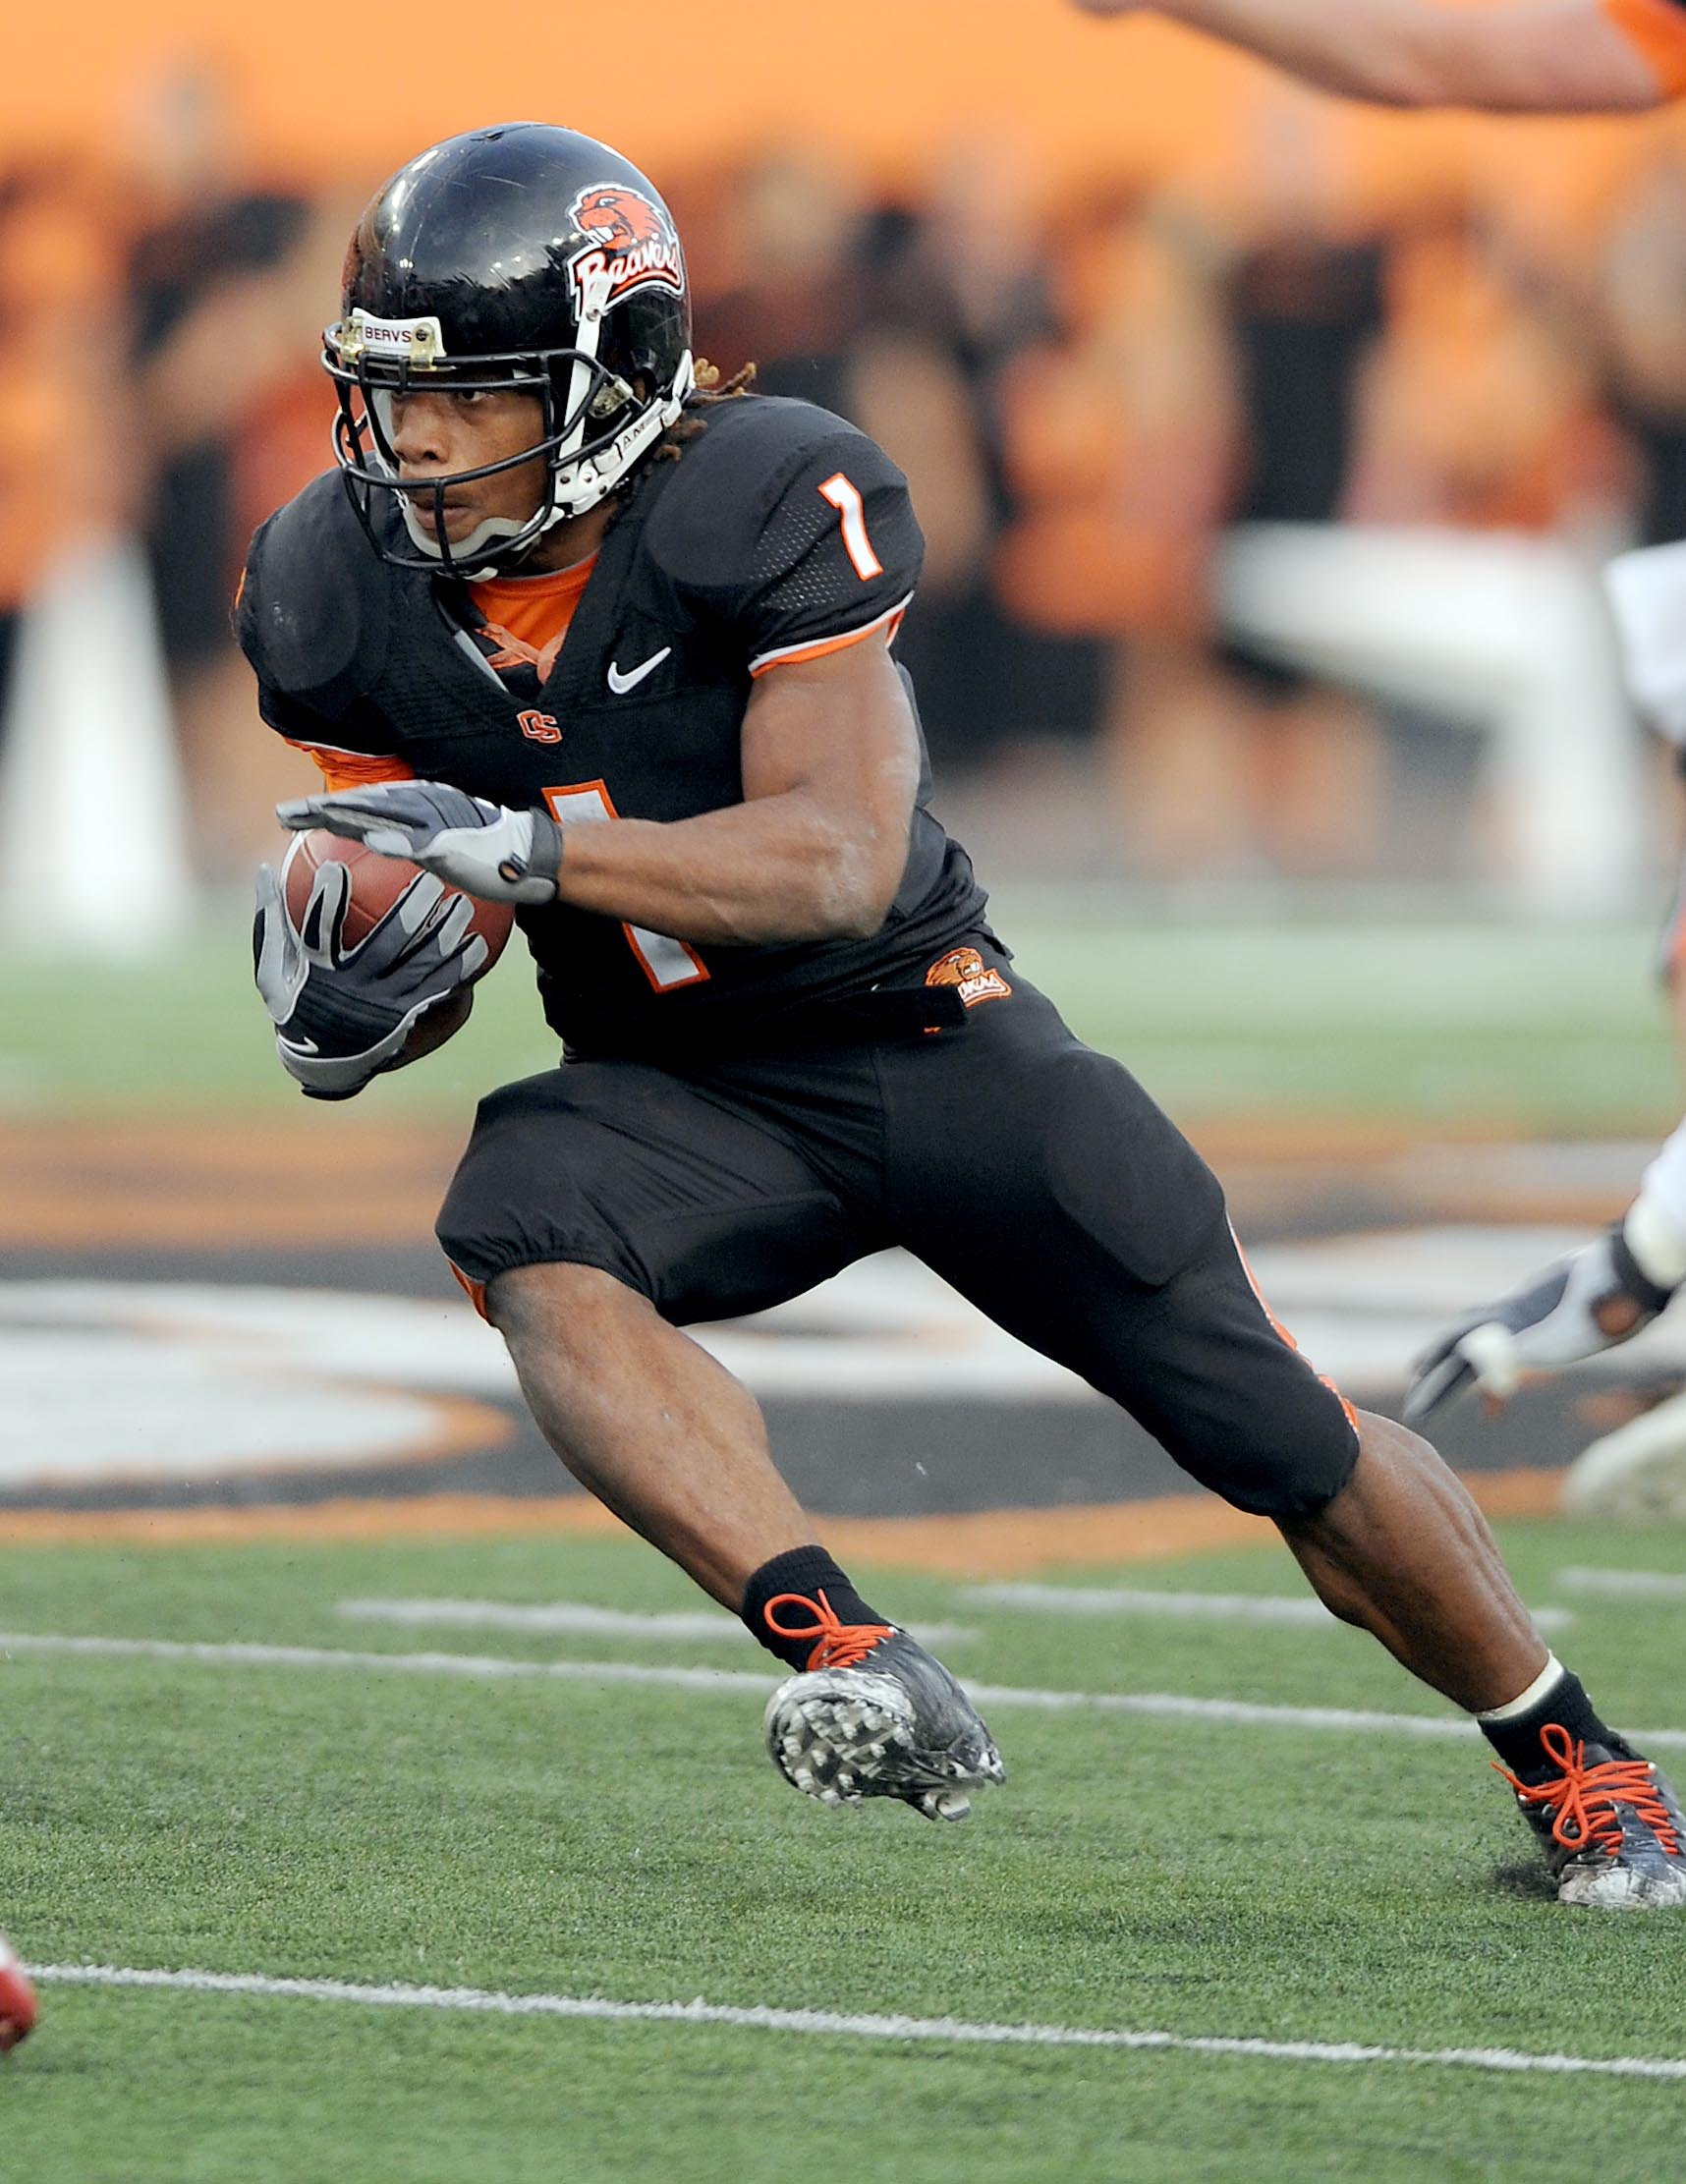 CORVALLIS, OR - OCTOBER 10: Running back Jacquizz Rodgers #1 of the Oregon State Beavers looks for some running room in the second quarter of the game against the Stanford Cardinals at Reser Stadium on October 10, 2009 in Corvallis, Oregon. Oregon State w